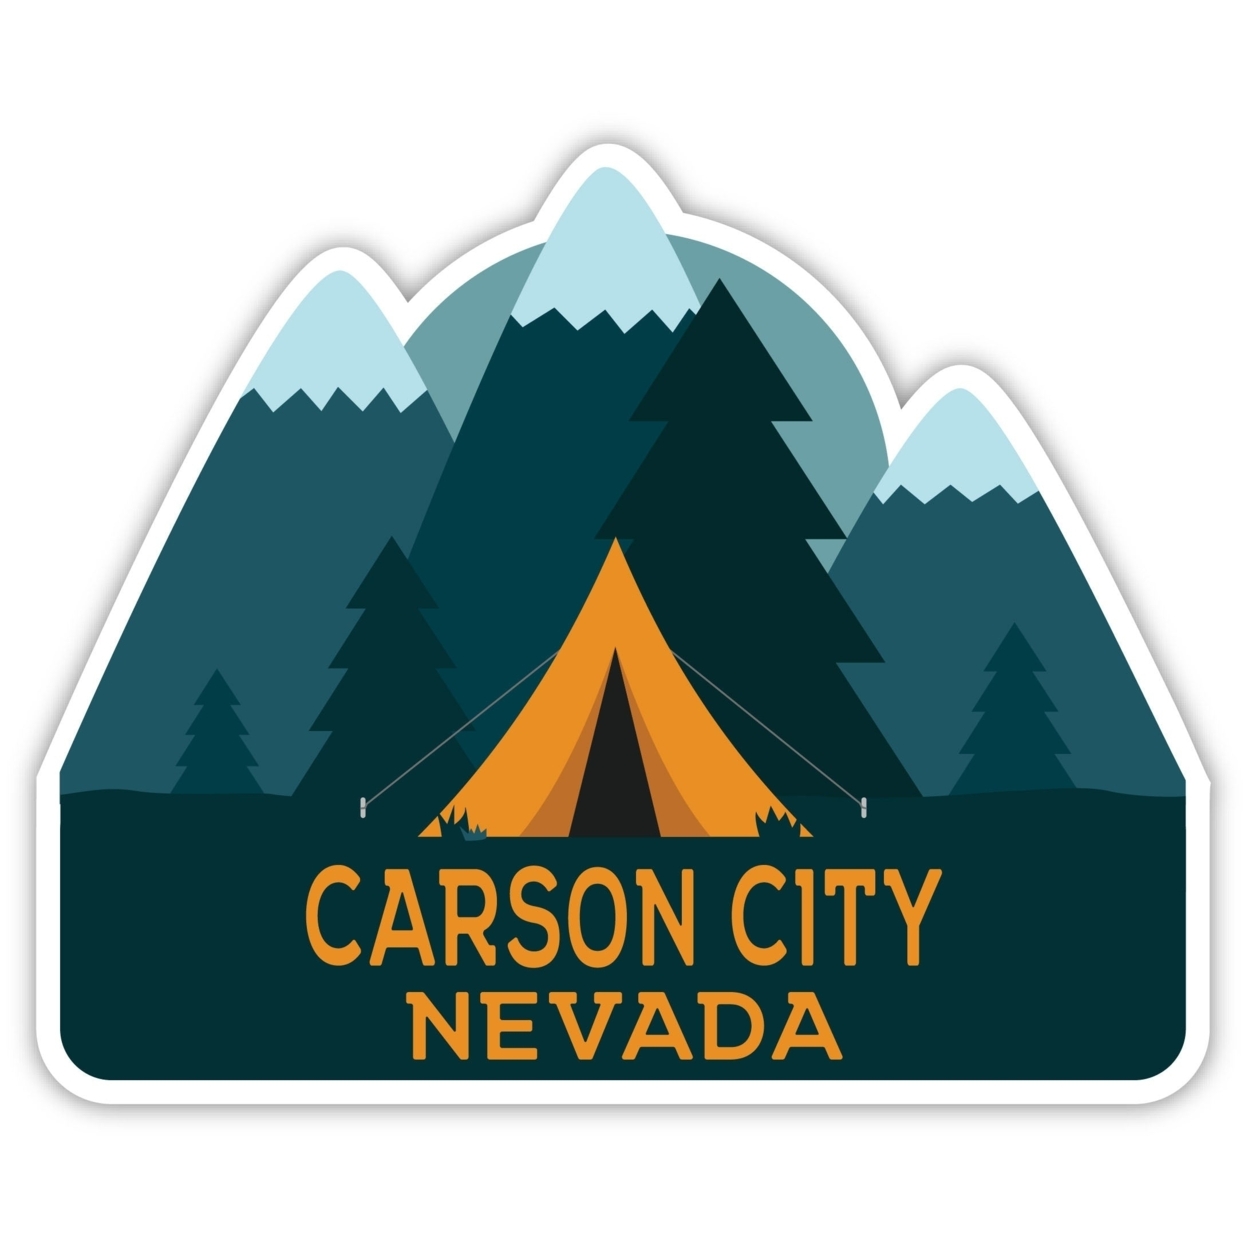 Carson City Nevada Souvenir Decorative Stickers (Choose Theme And Size) - 4-Pack, 4-Inch, Tent